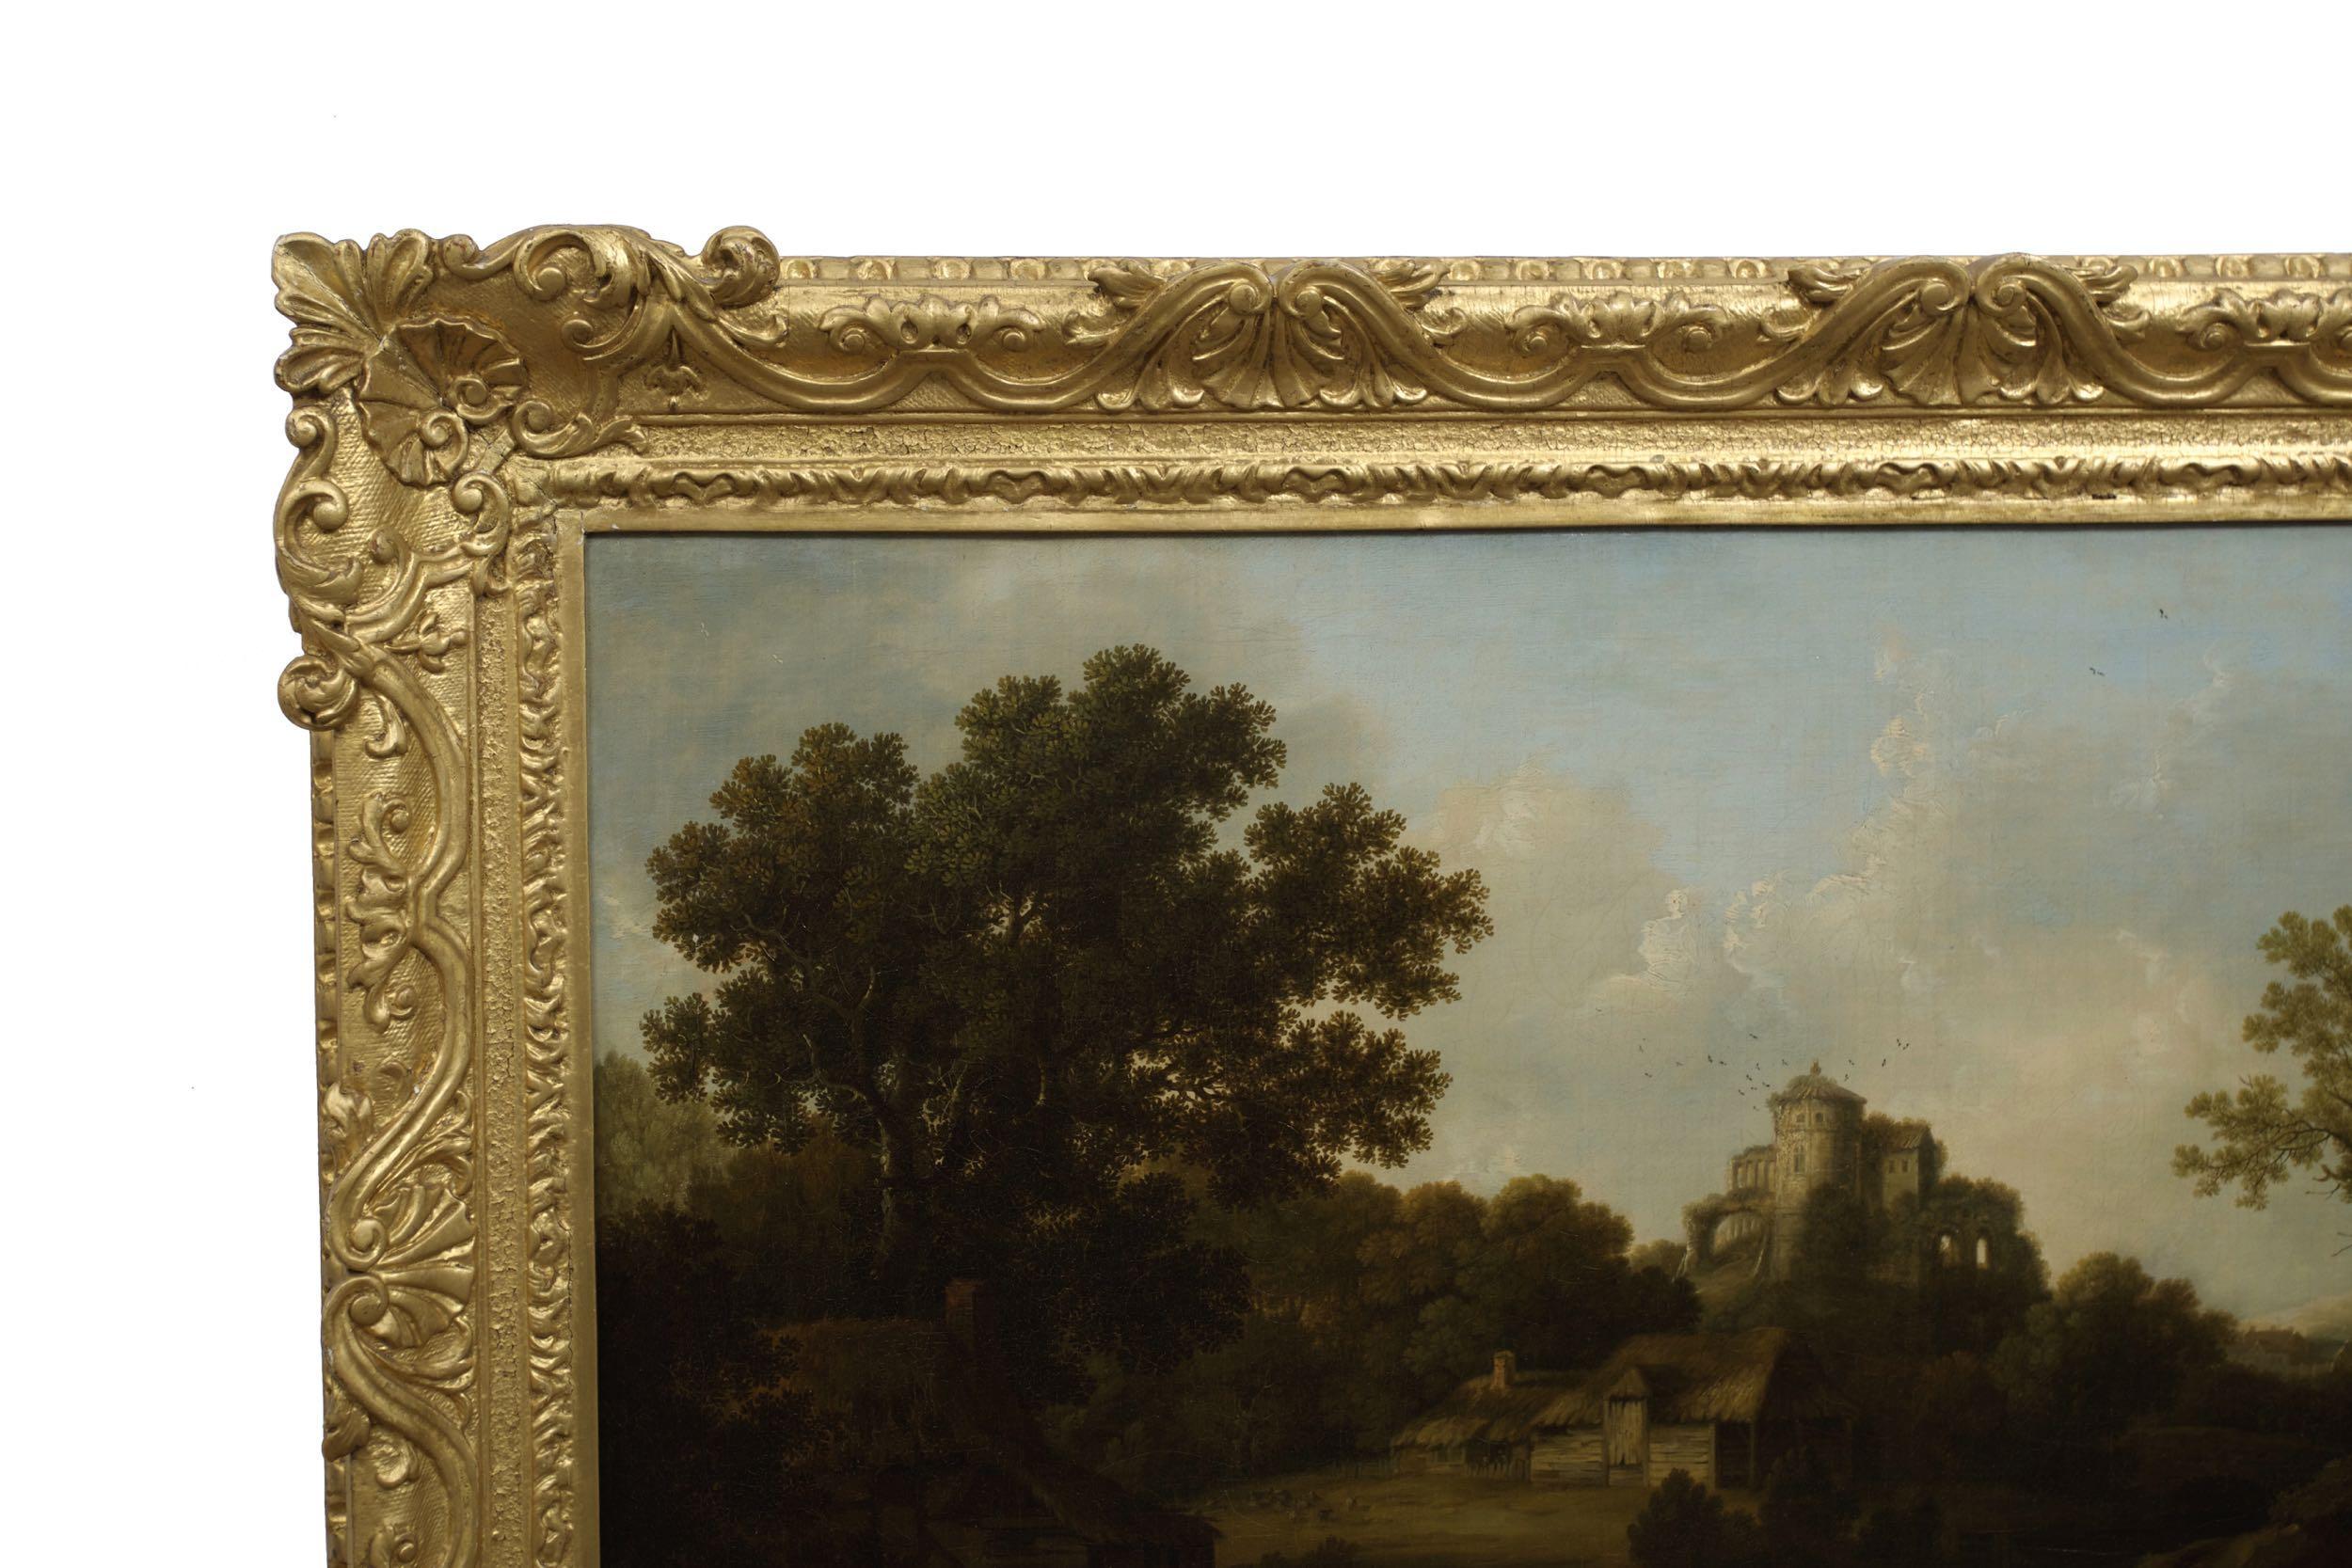 British “Landscape w/ Castle Ruins” Antique English Painting by George Smith